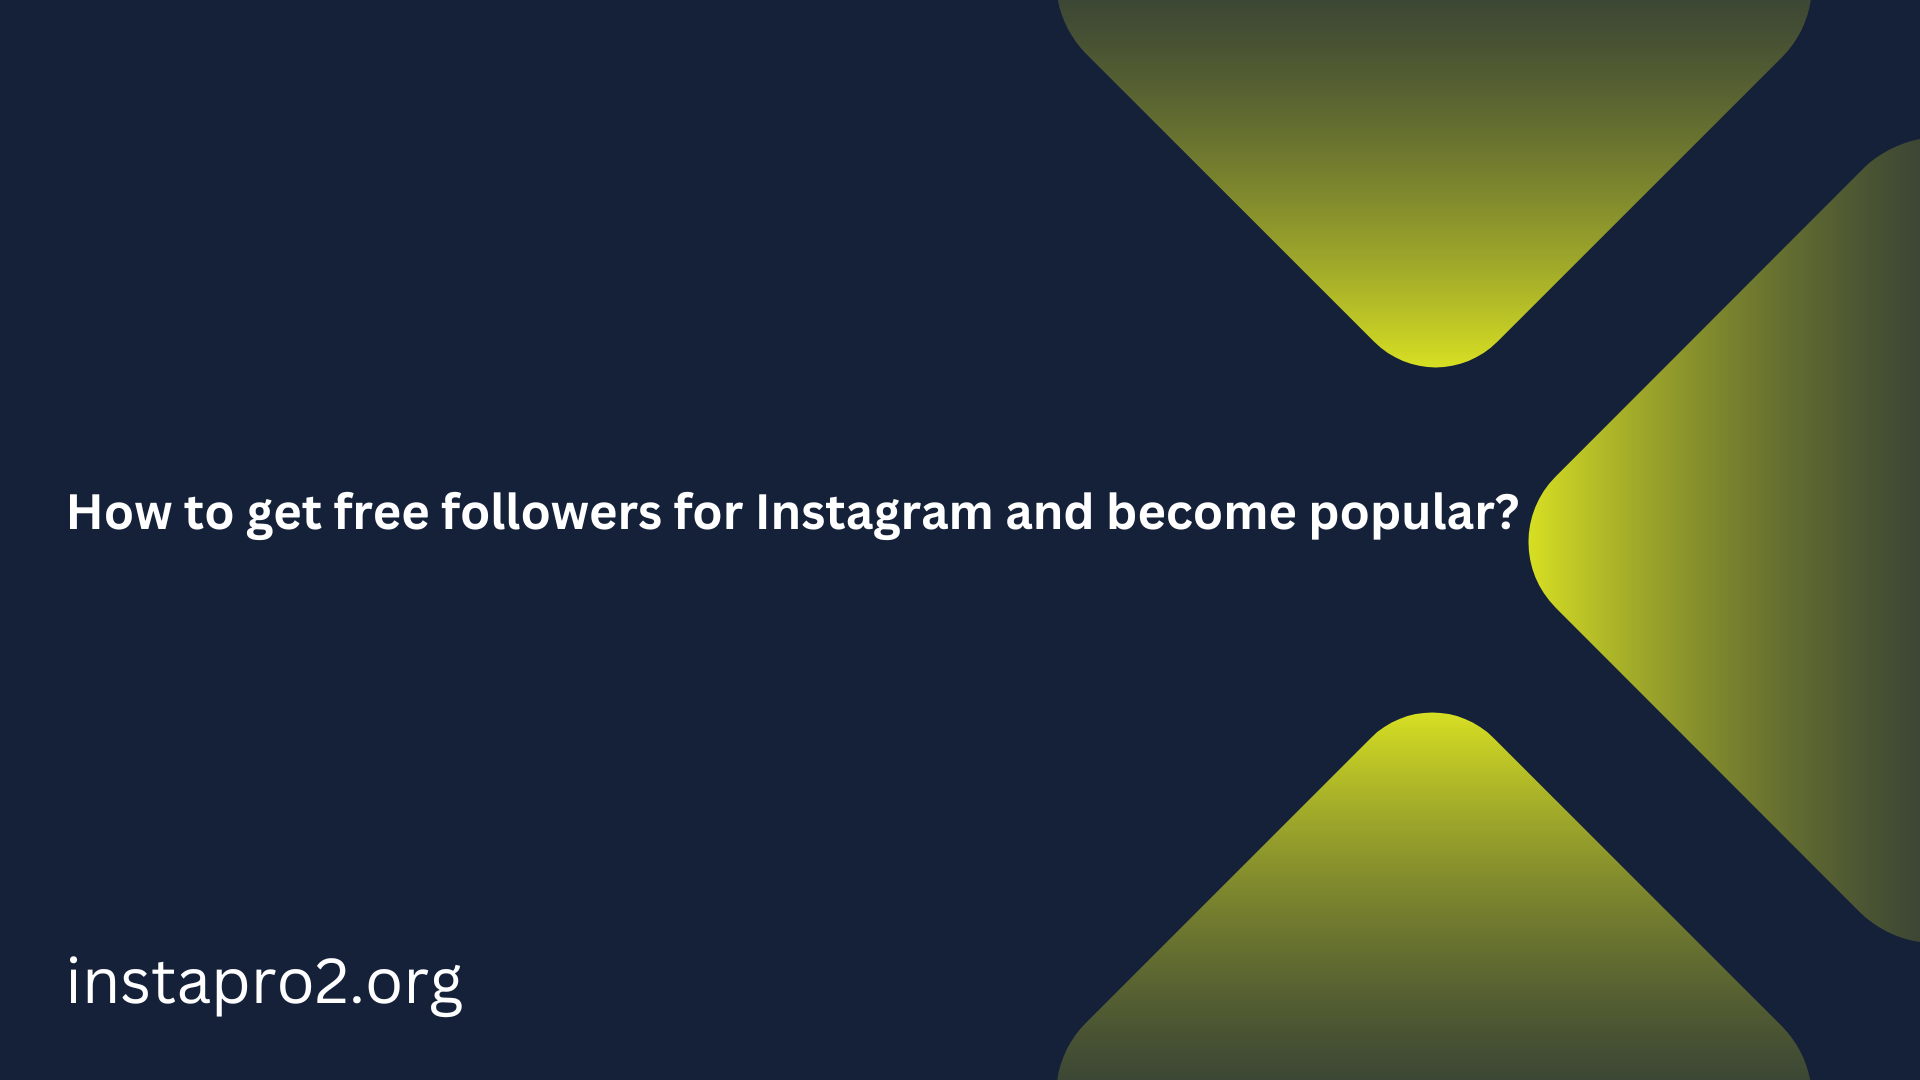 The Instagram platform is one of the trendy social media networks. How to get free followers for Instagram and become popular?